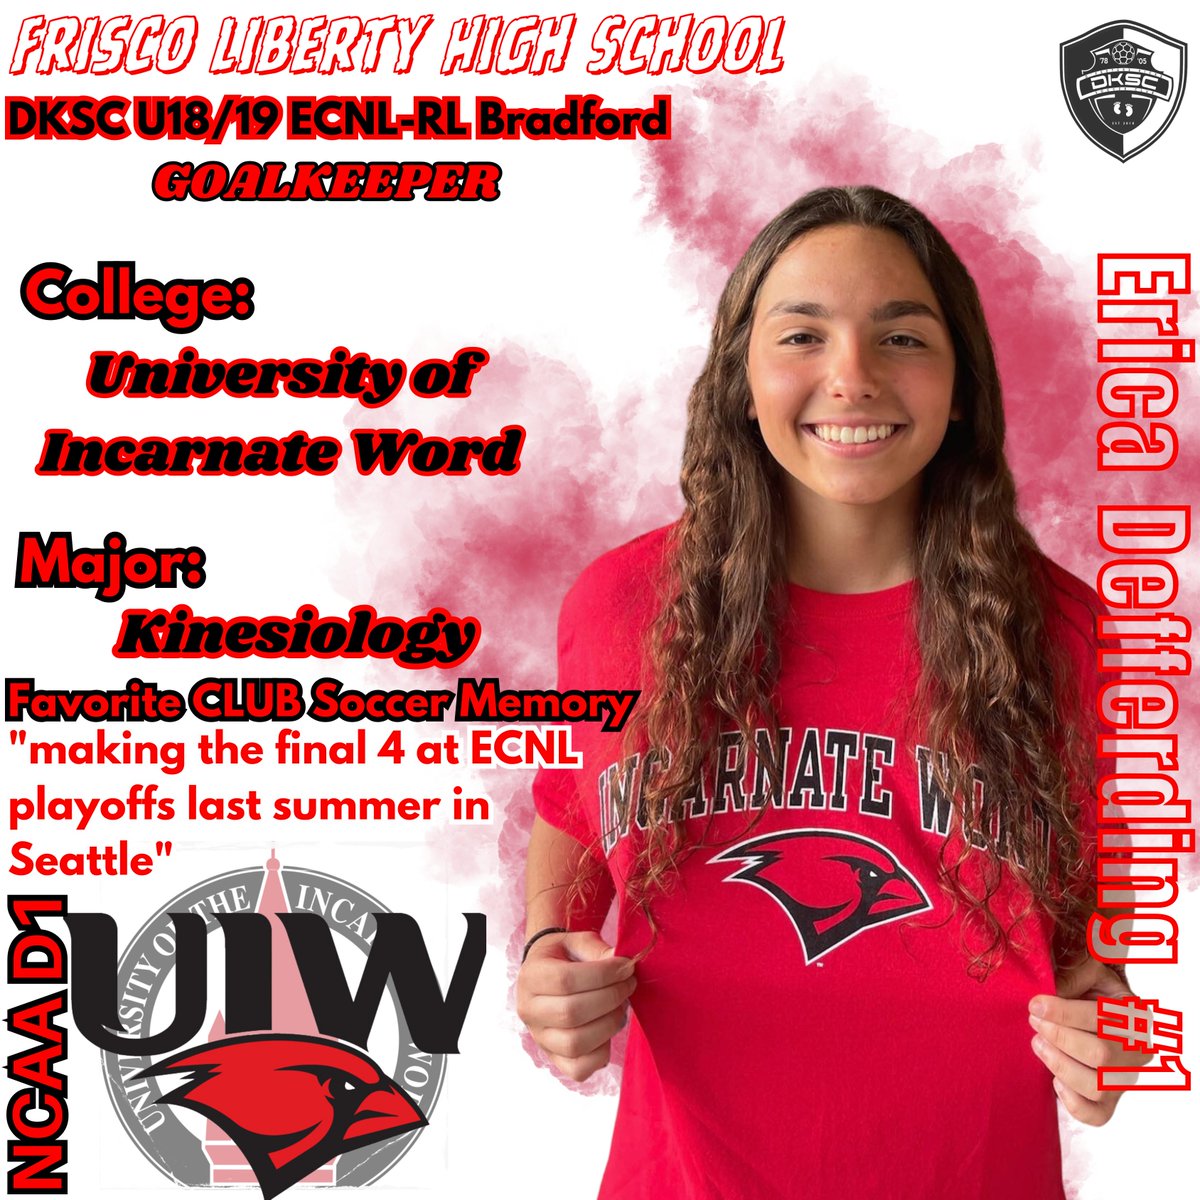 SENIOR SPOTLIGHT:
With 6 shutouts Erica has been GREAT in goal all season!

Erica plans on majoring in Kinesiology and will continue to play NCAA D1 soccer @uiwwsoccer 🧤💪

We are so PROUD of Erica and wish her nothing but the best in all her future endeavors!